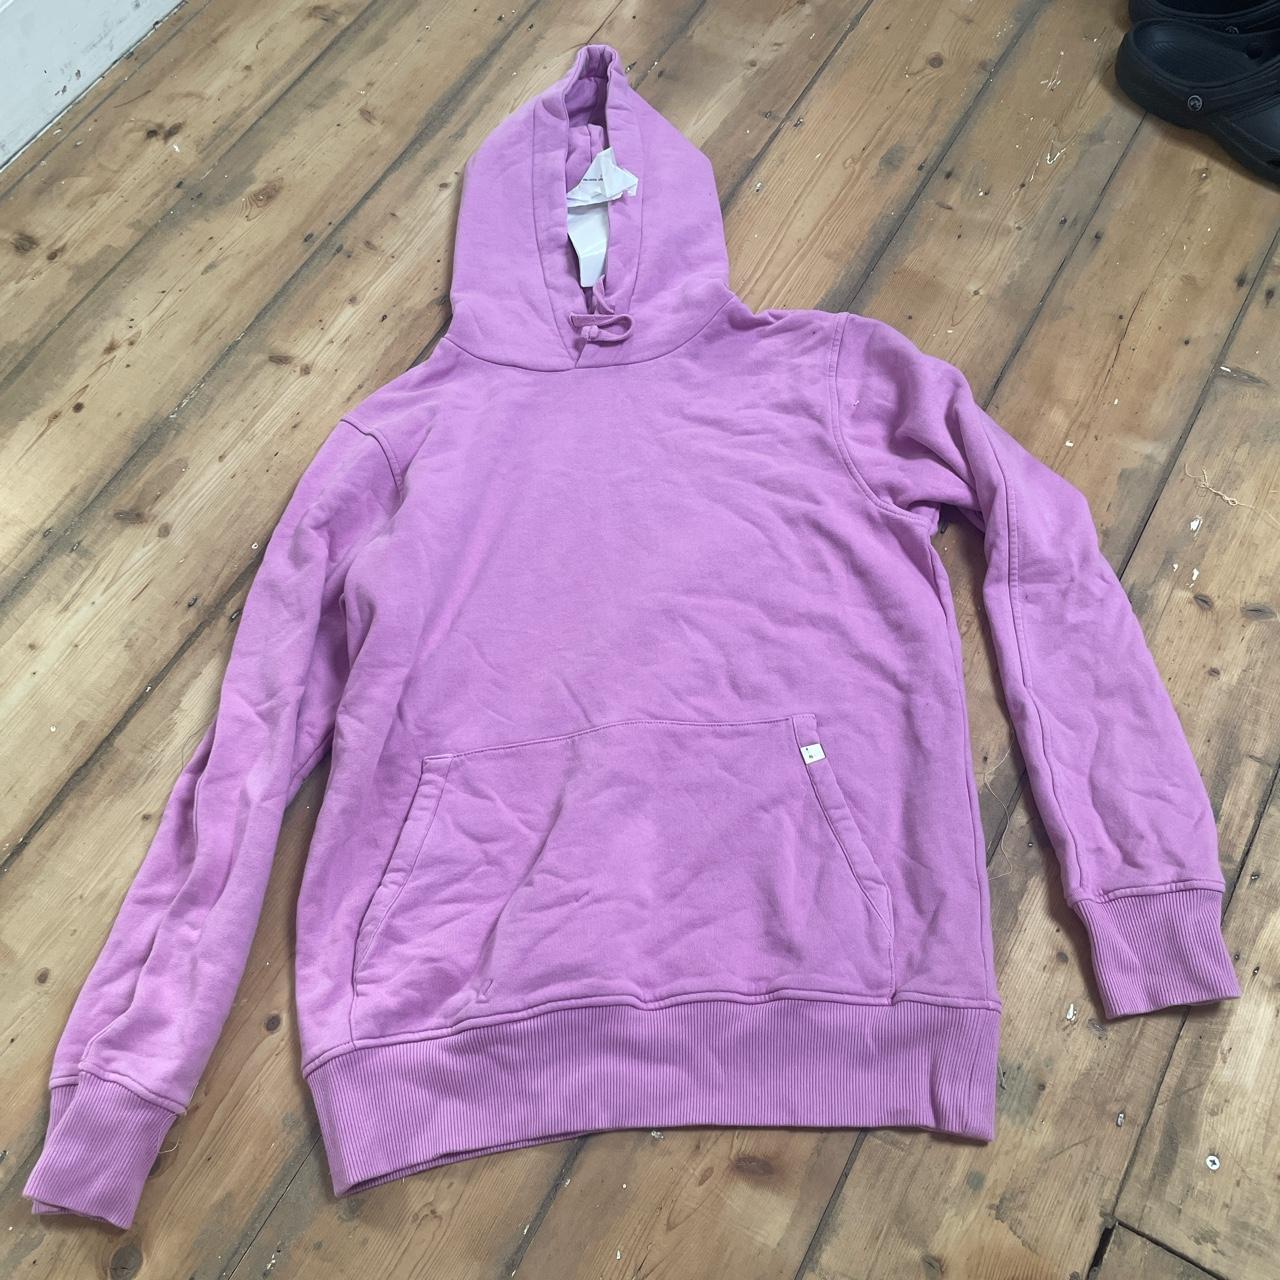 Alyx Hoodie Brand New With Tags Size M RRP - £255 - Depop